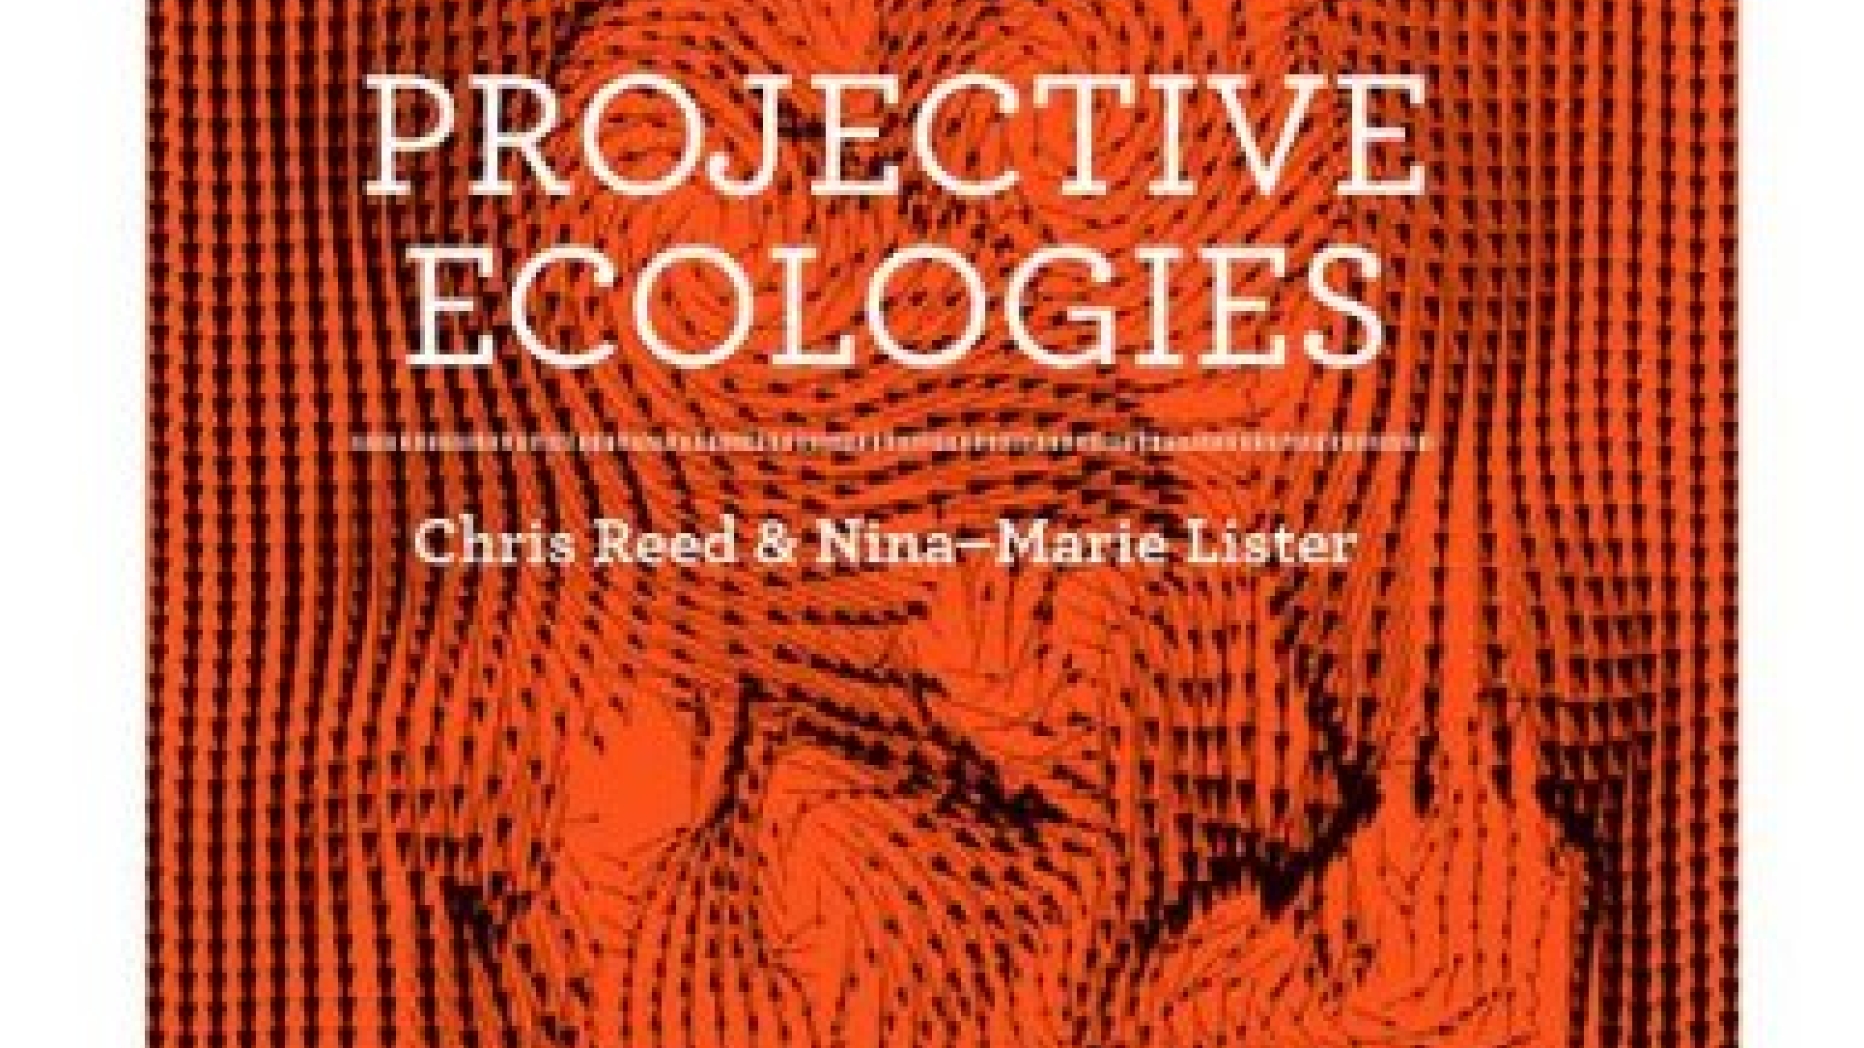 Cover of Projective Ecologies by Chris Reed and Nina Marie Lister